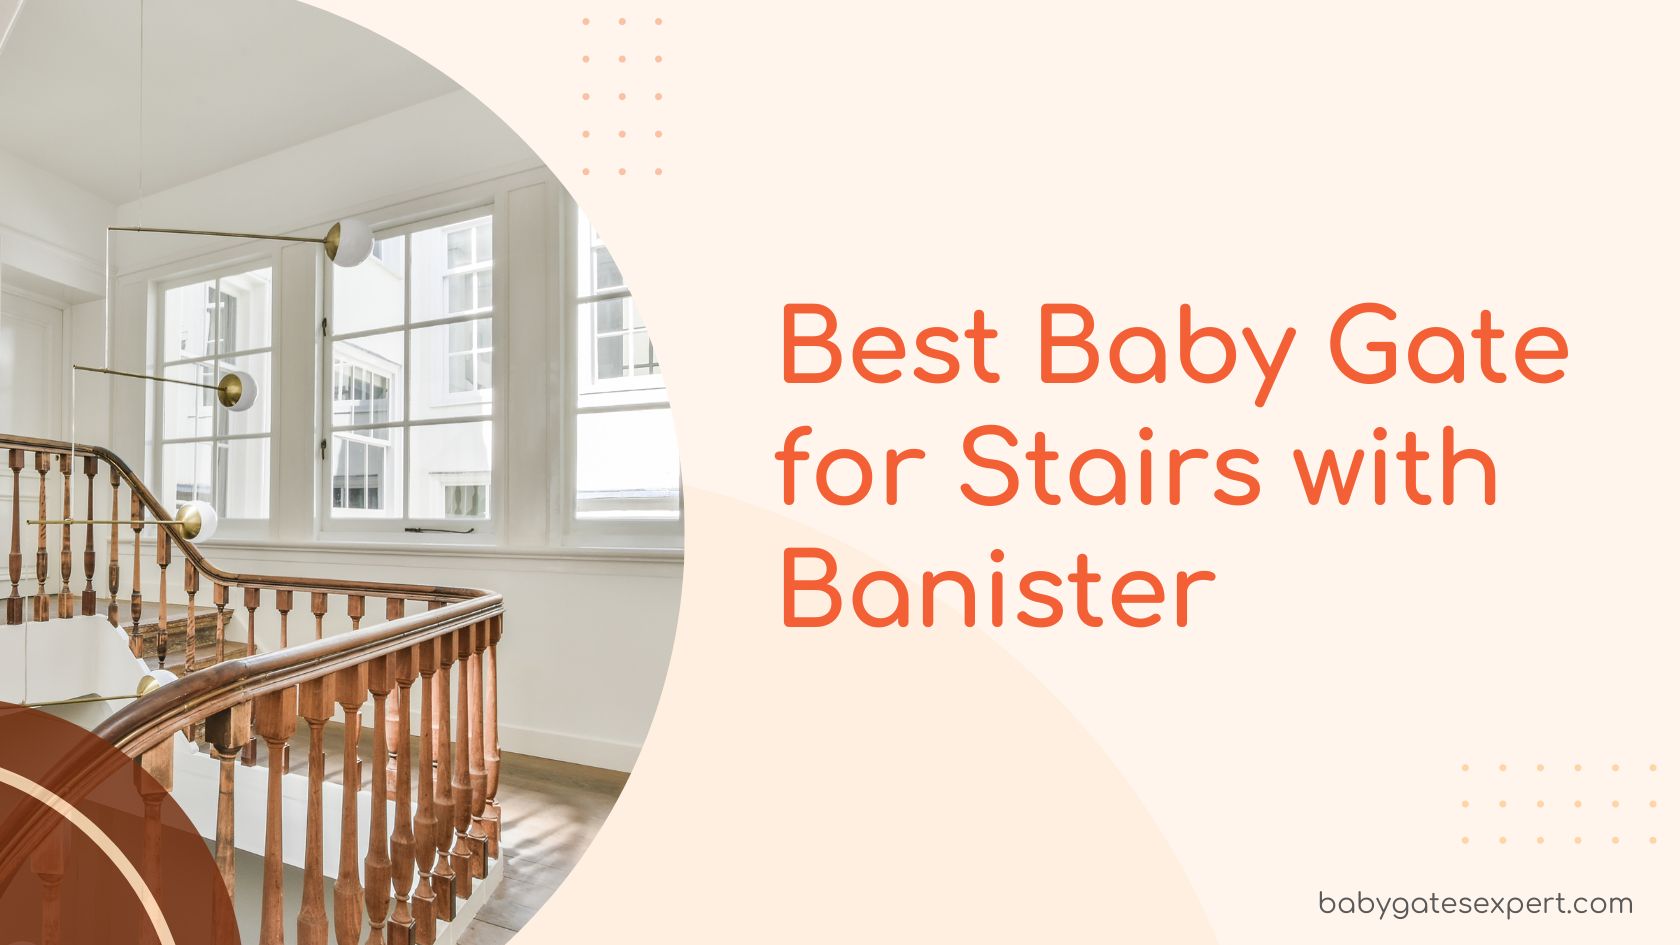 Best Baby Gate for Stairs with a Banister